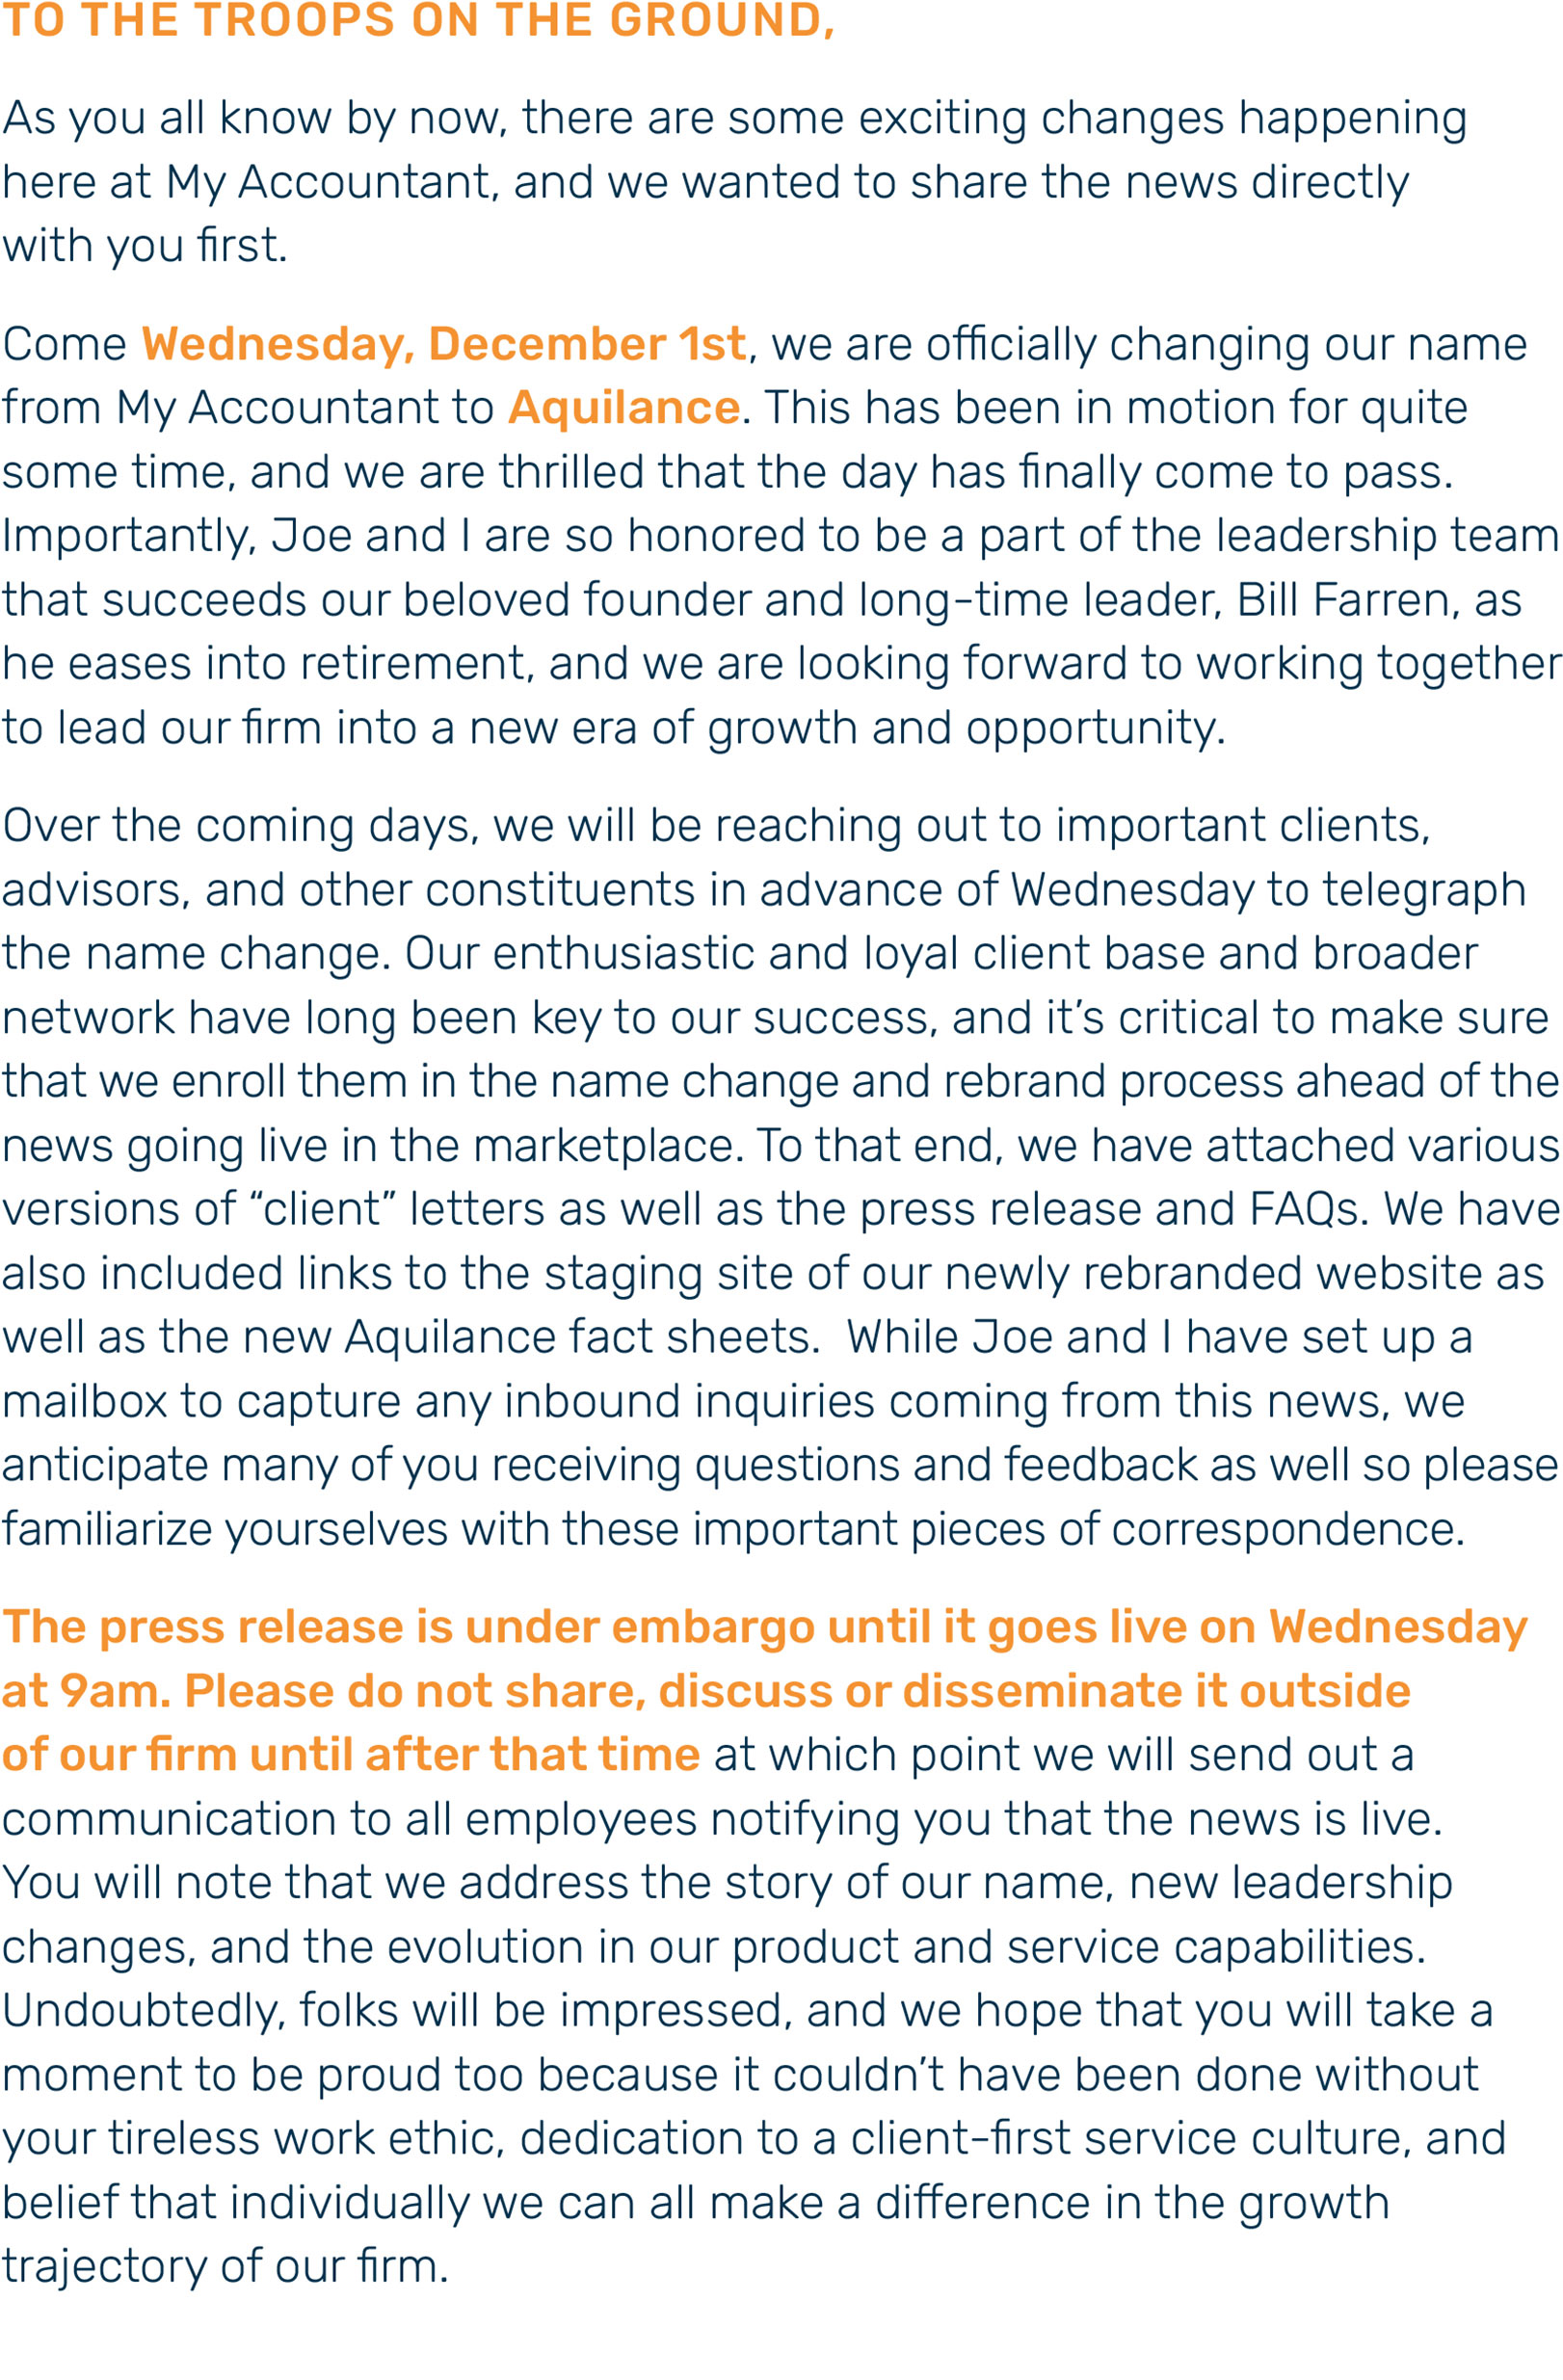 An announcement to Aquilance employees about the name change happening starting December 1, 2021